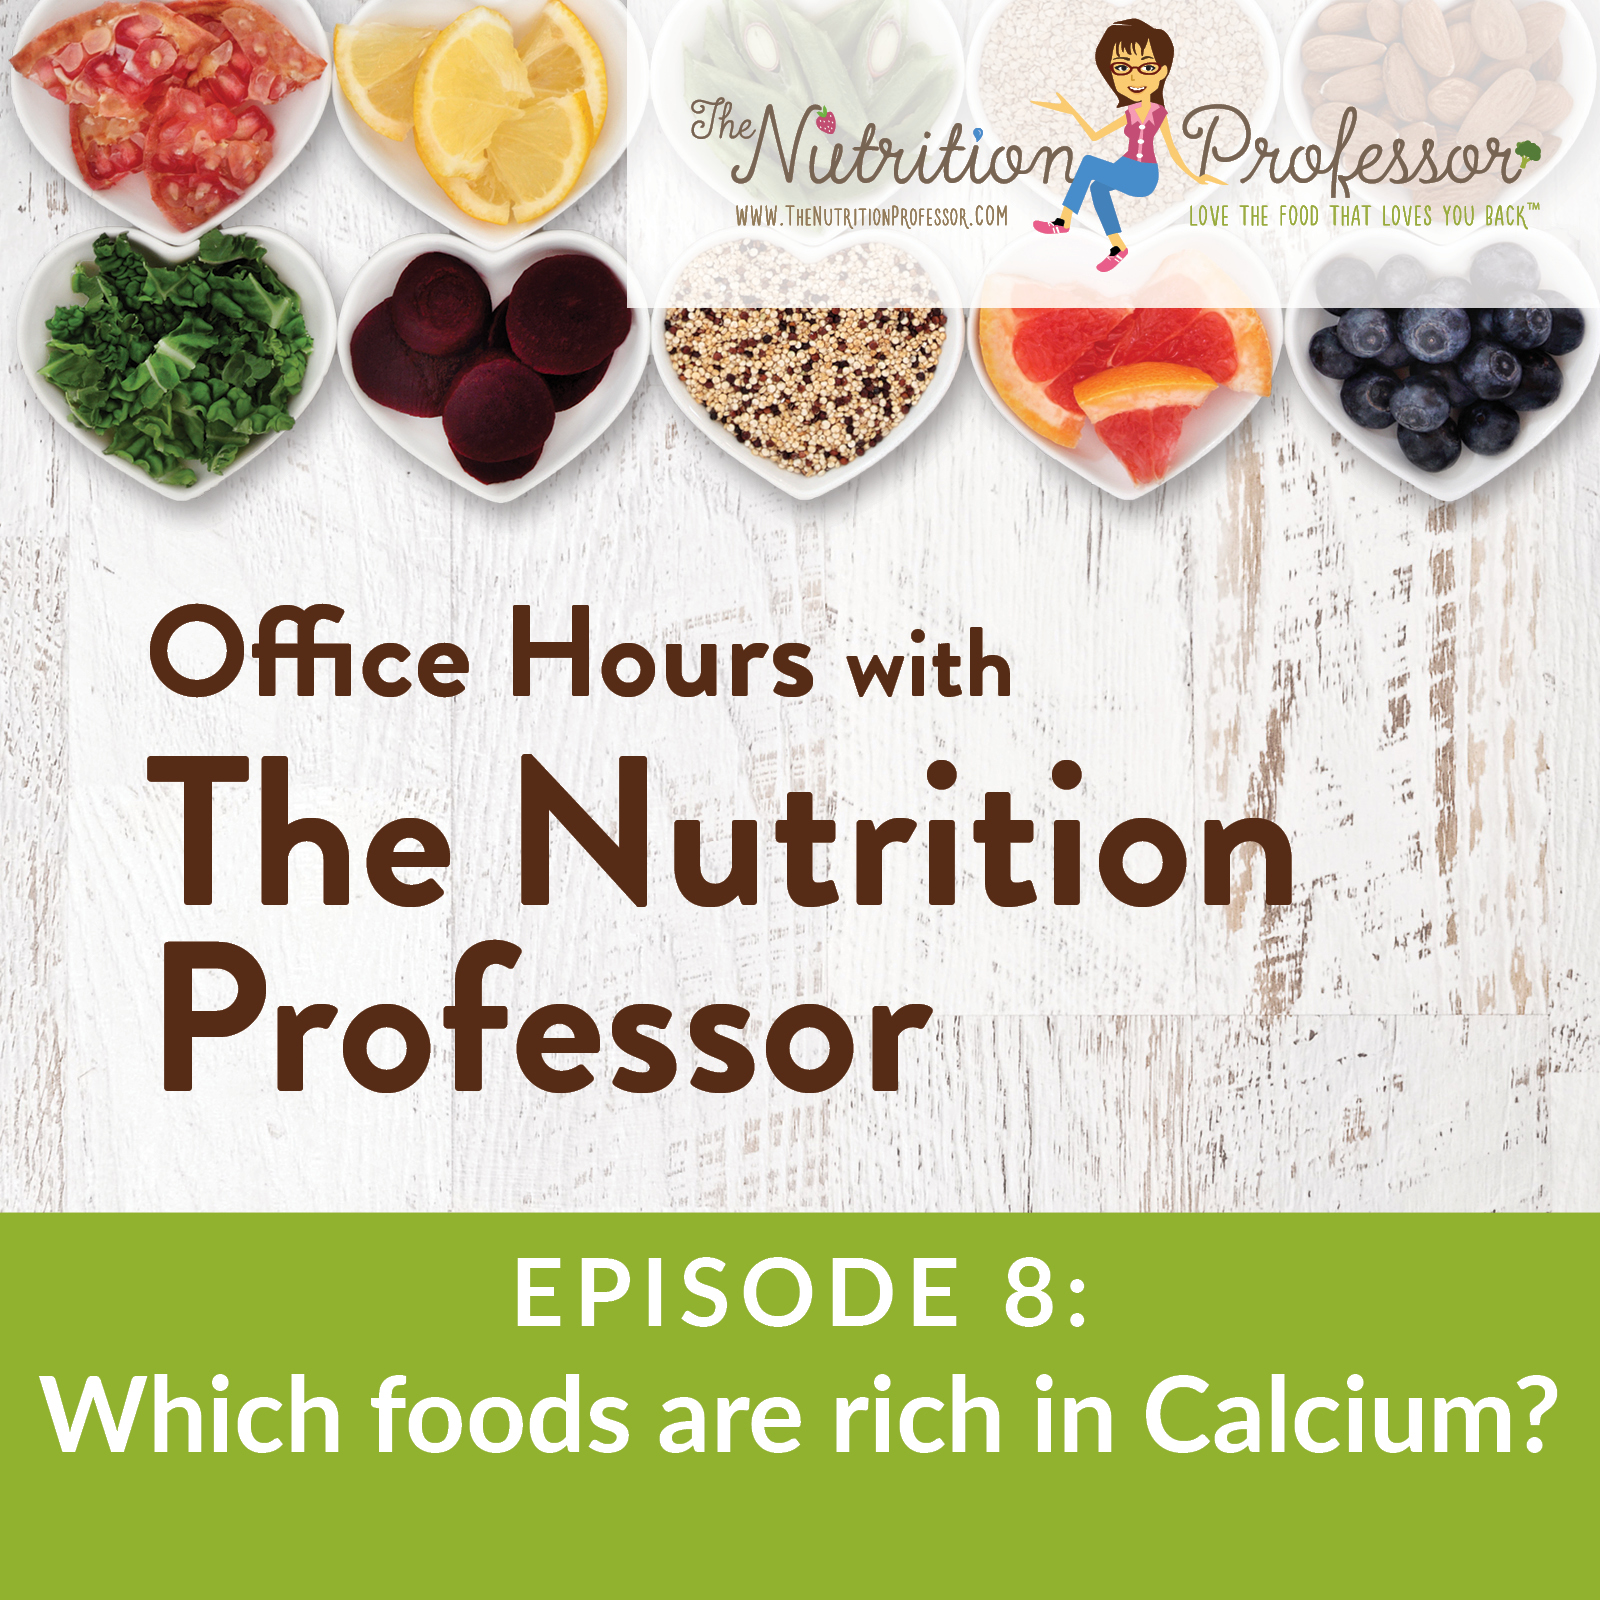 Podcast Episode 8: Which foods are rich in calcium?